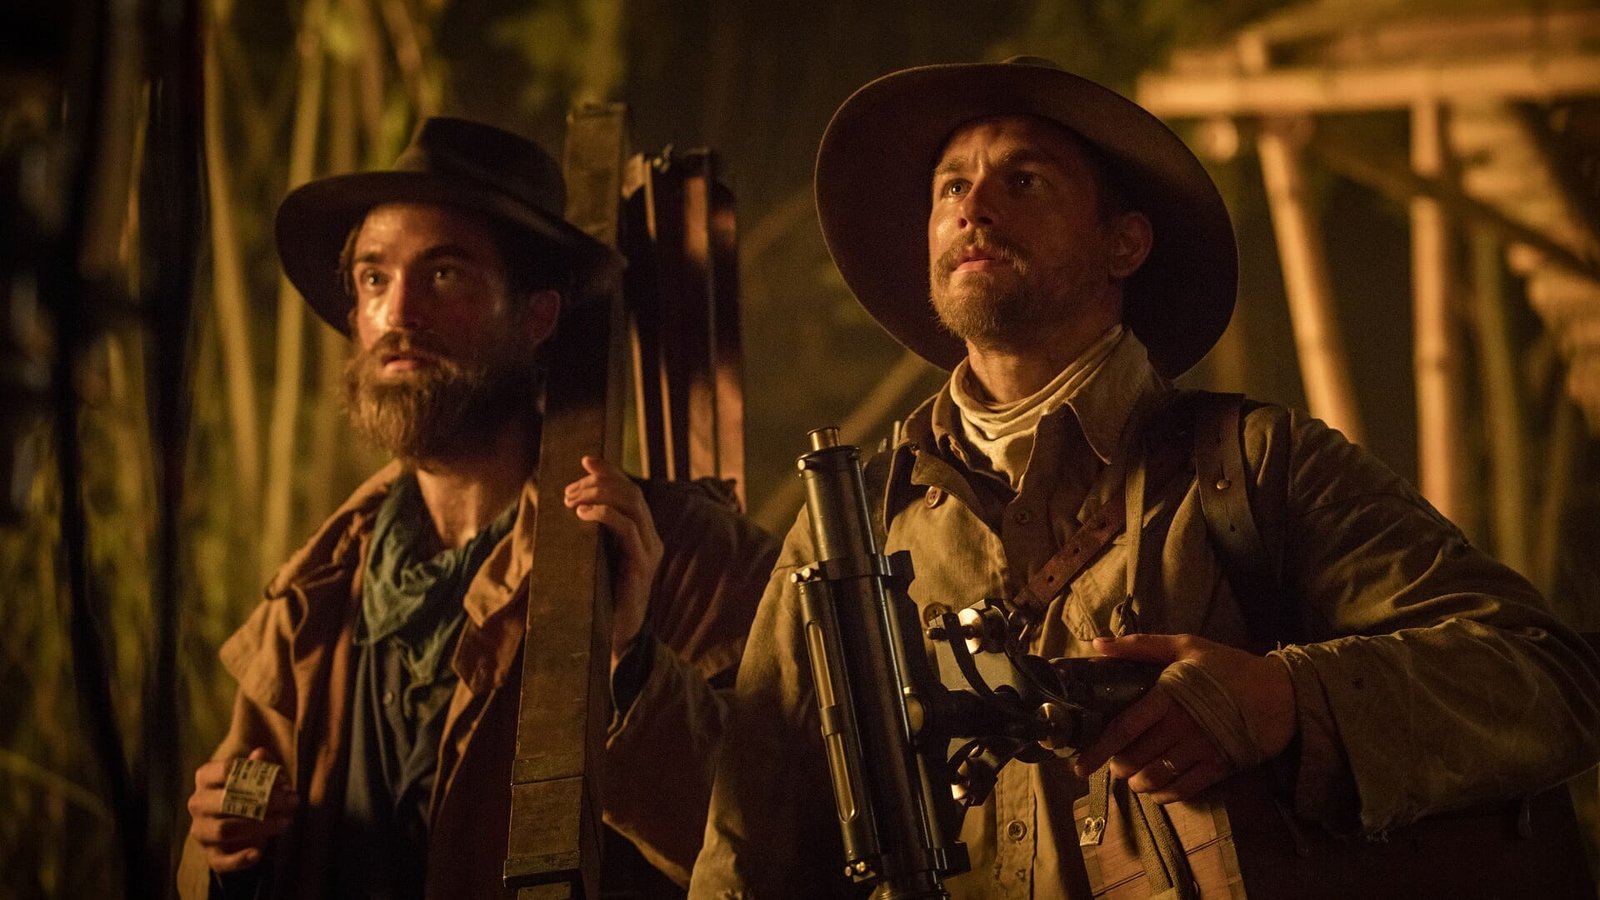 Best Action Movies on Amazon Prime: The Lost City of Z